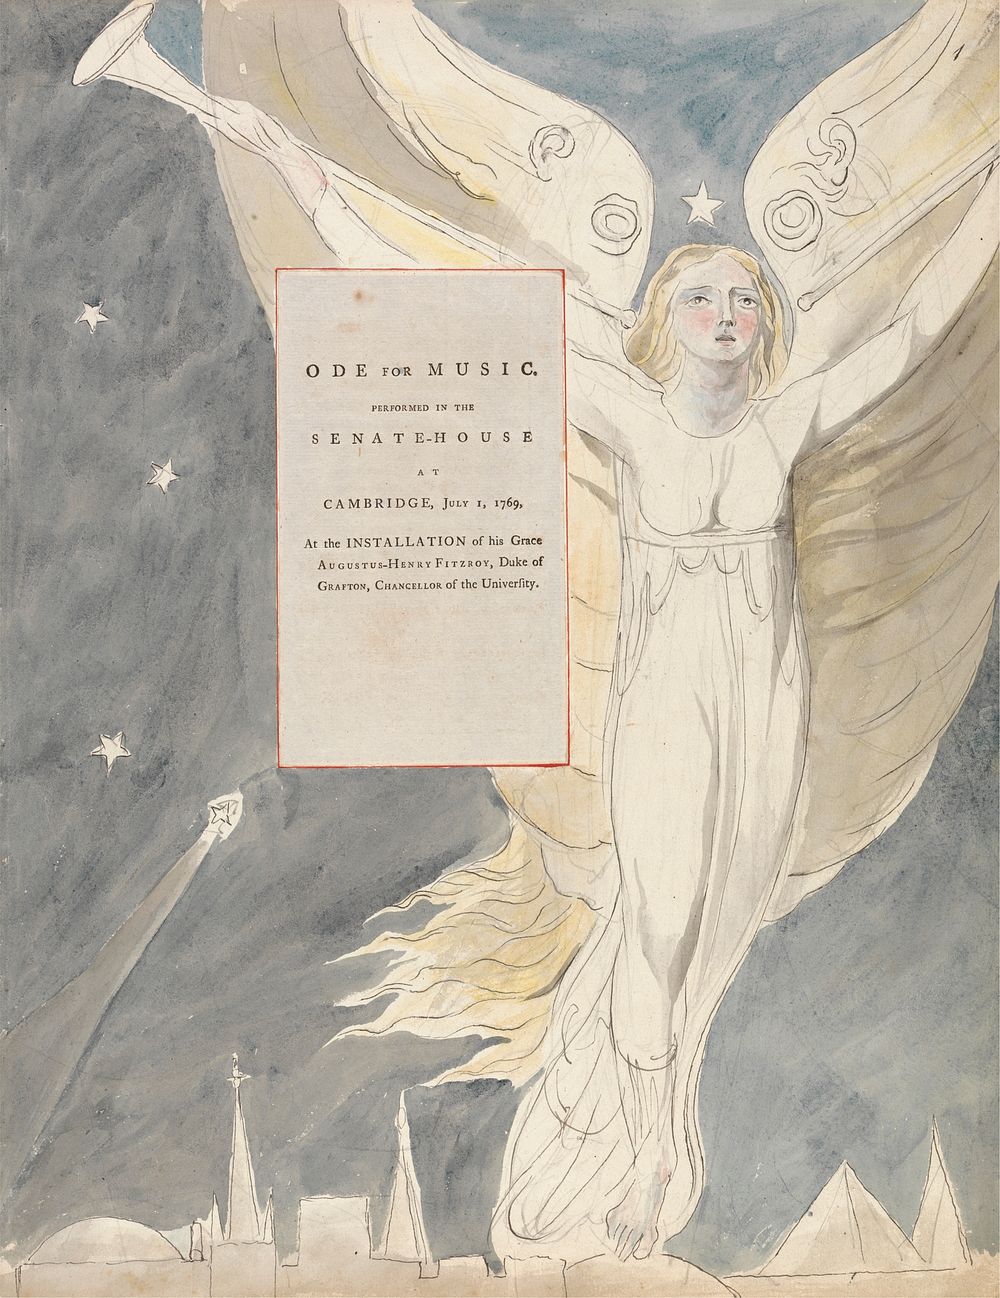 The Poems of Thomas Gray, Design 93, "Ode for Music." by William Blake. Original public domain image from Yale Center for…